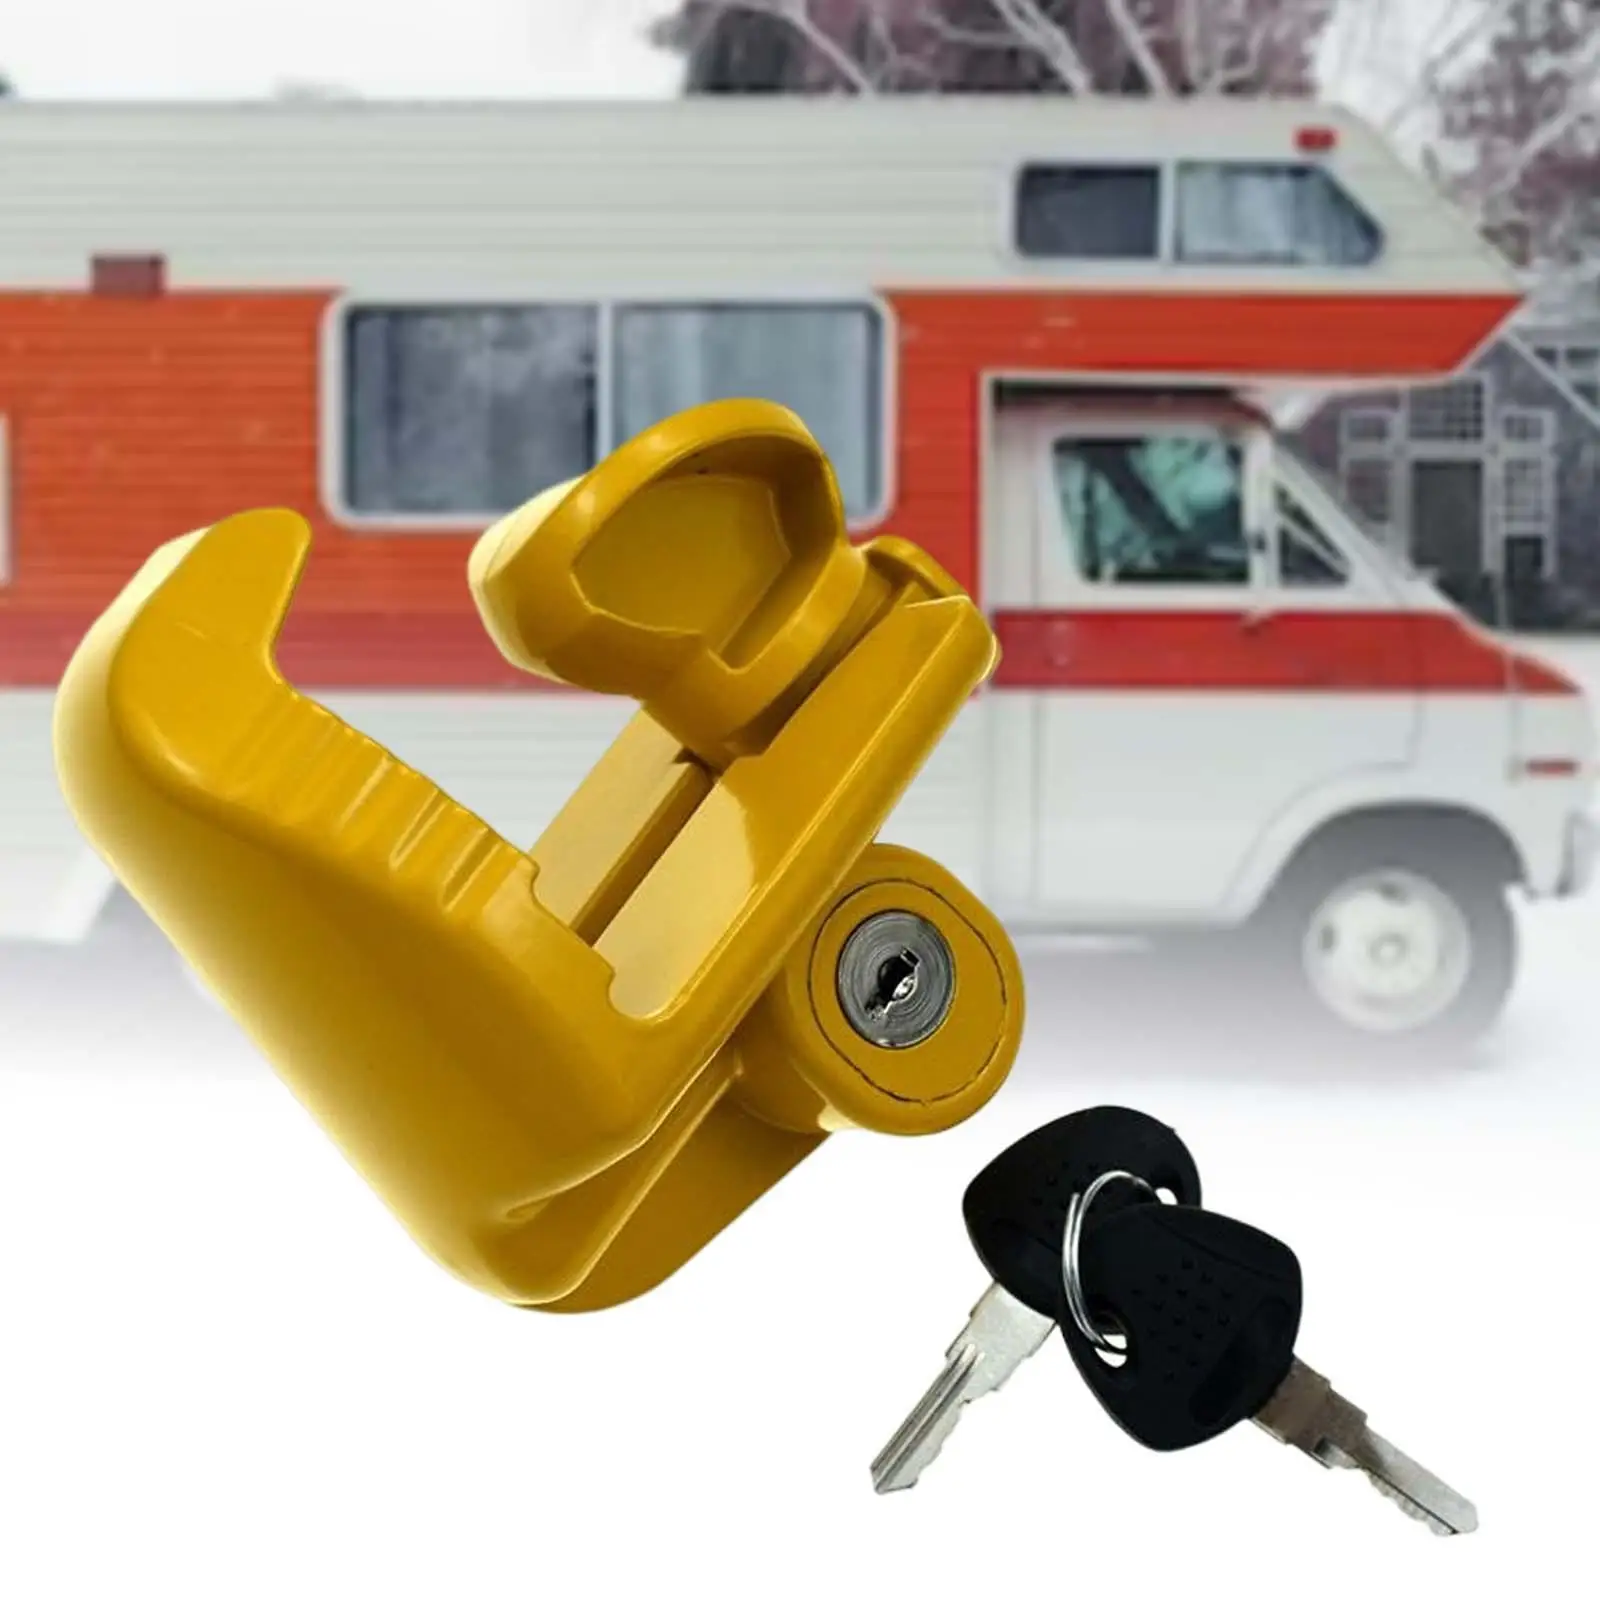 Coupler Lock universal Yellow Adjustable Anti Lock Portable Metal Security Parts Easy to Install